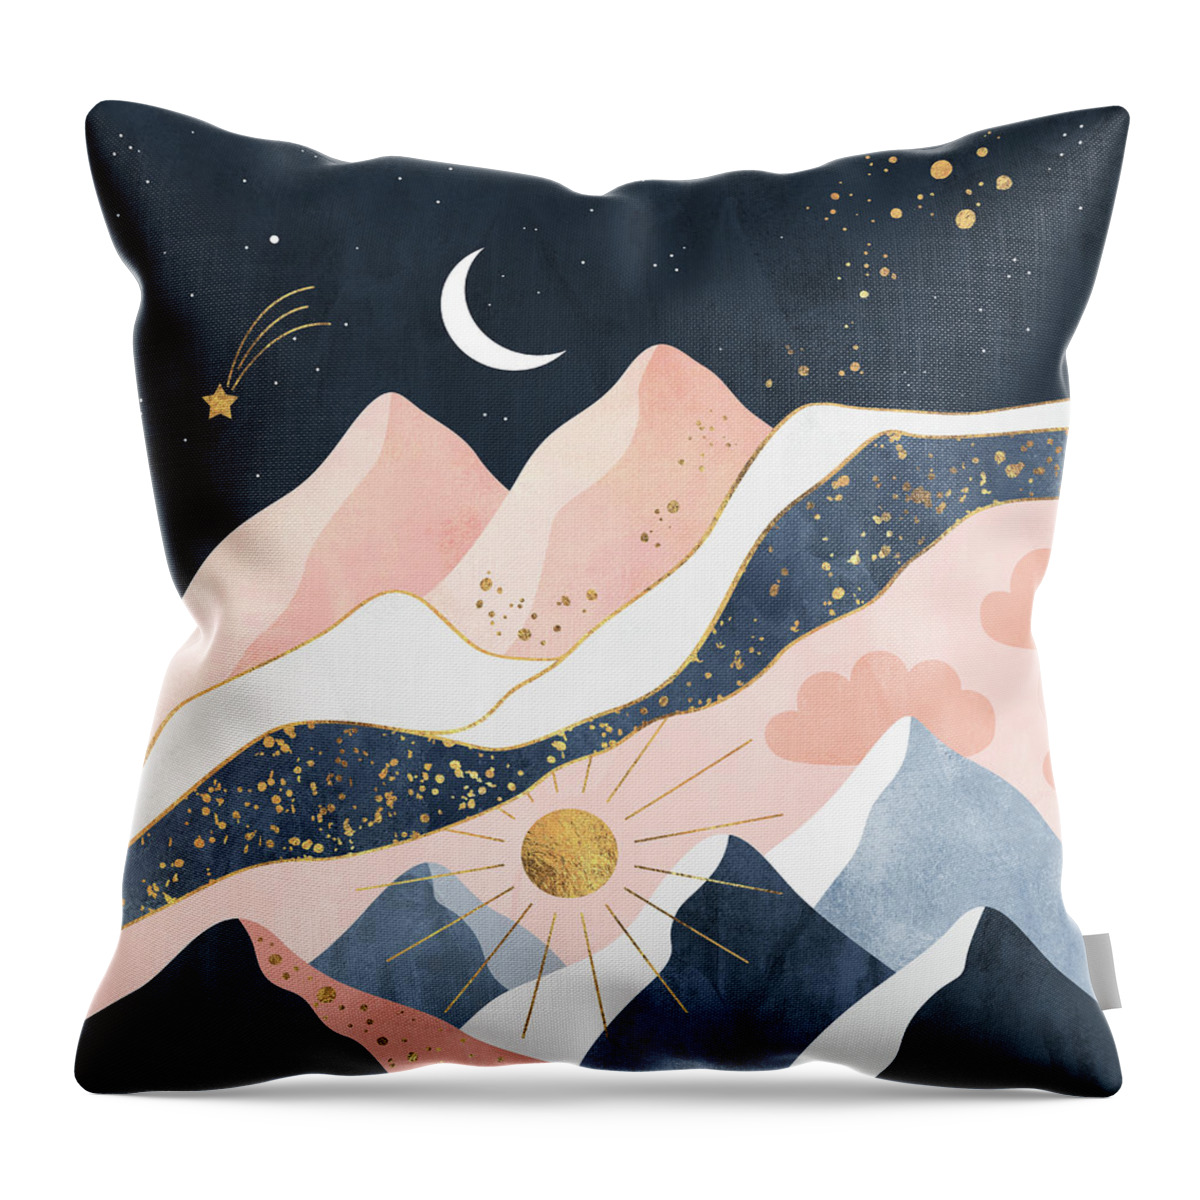 Landscape Throw Pillow featuring the digital art Night And Day by Elisabeth Fredriksson